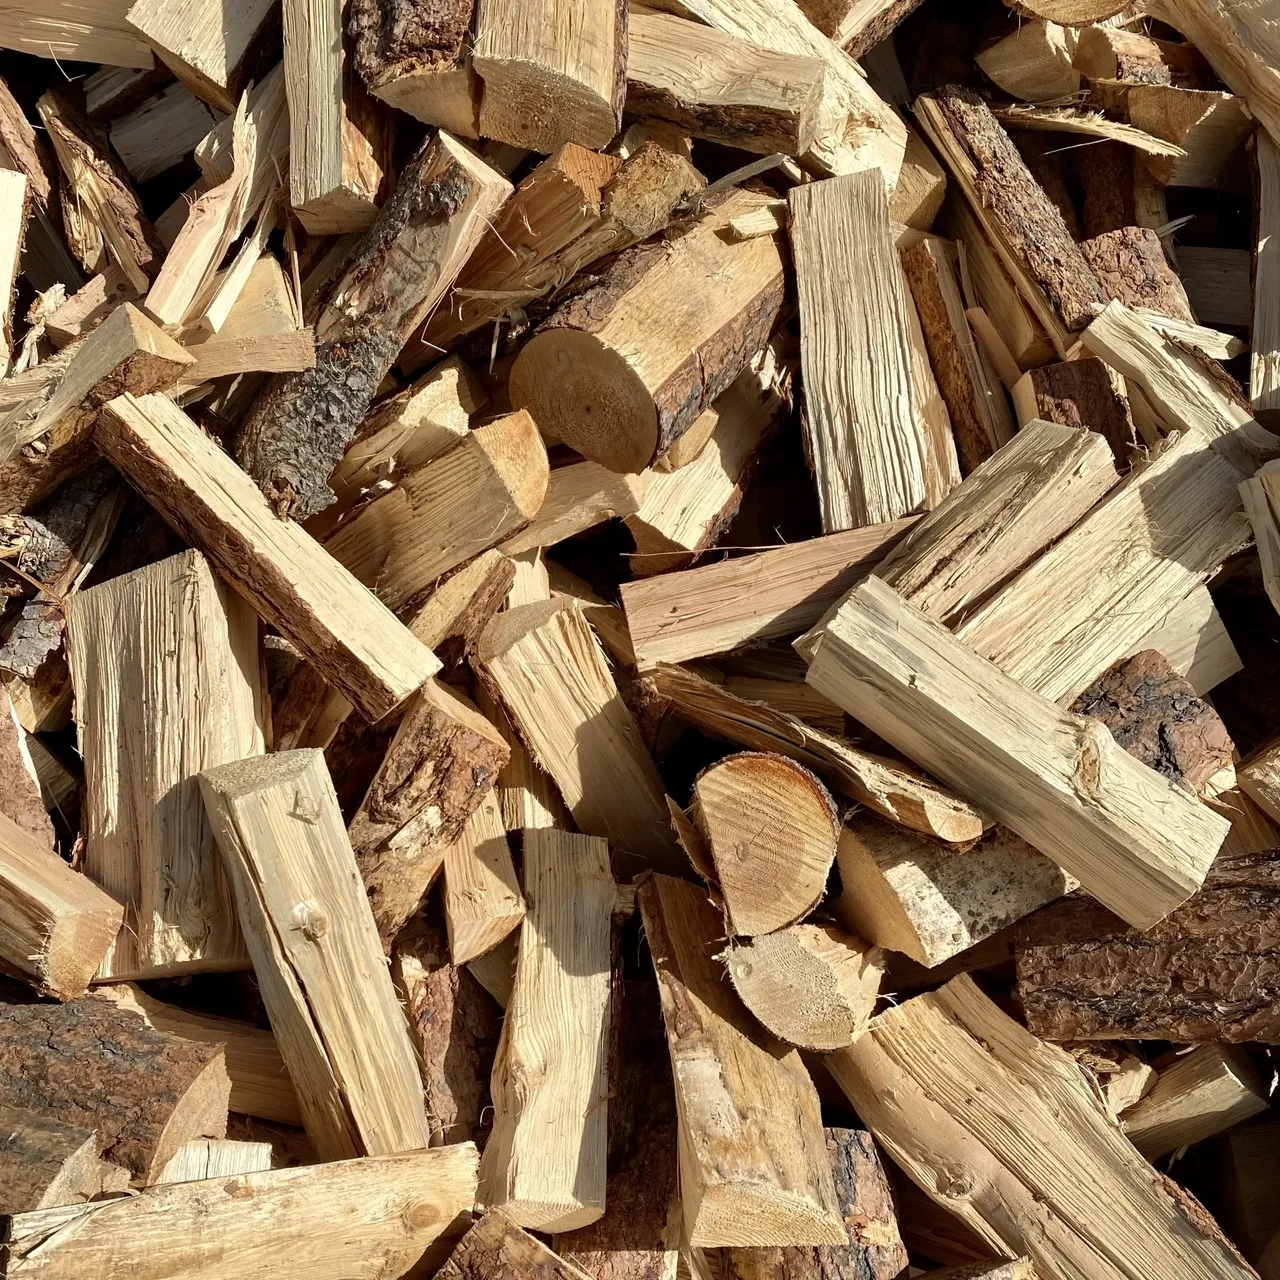 A pile of wood that is chopped up.